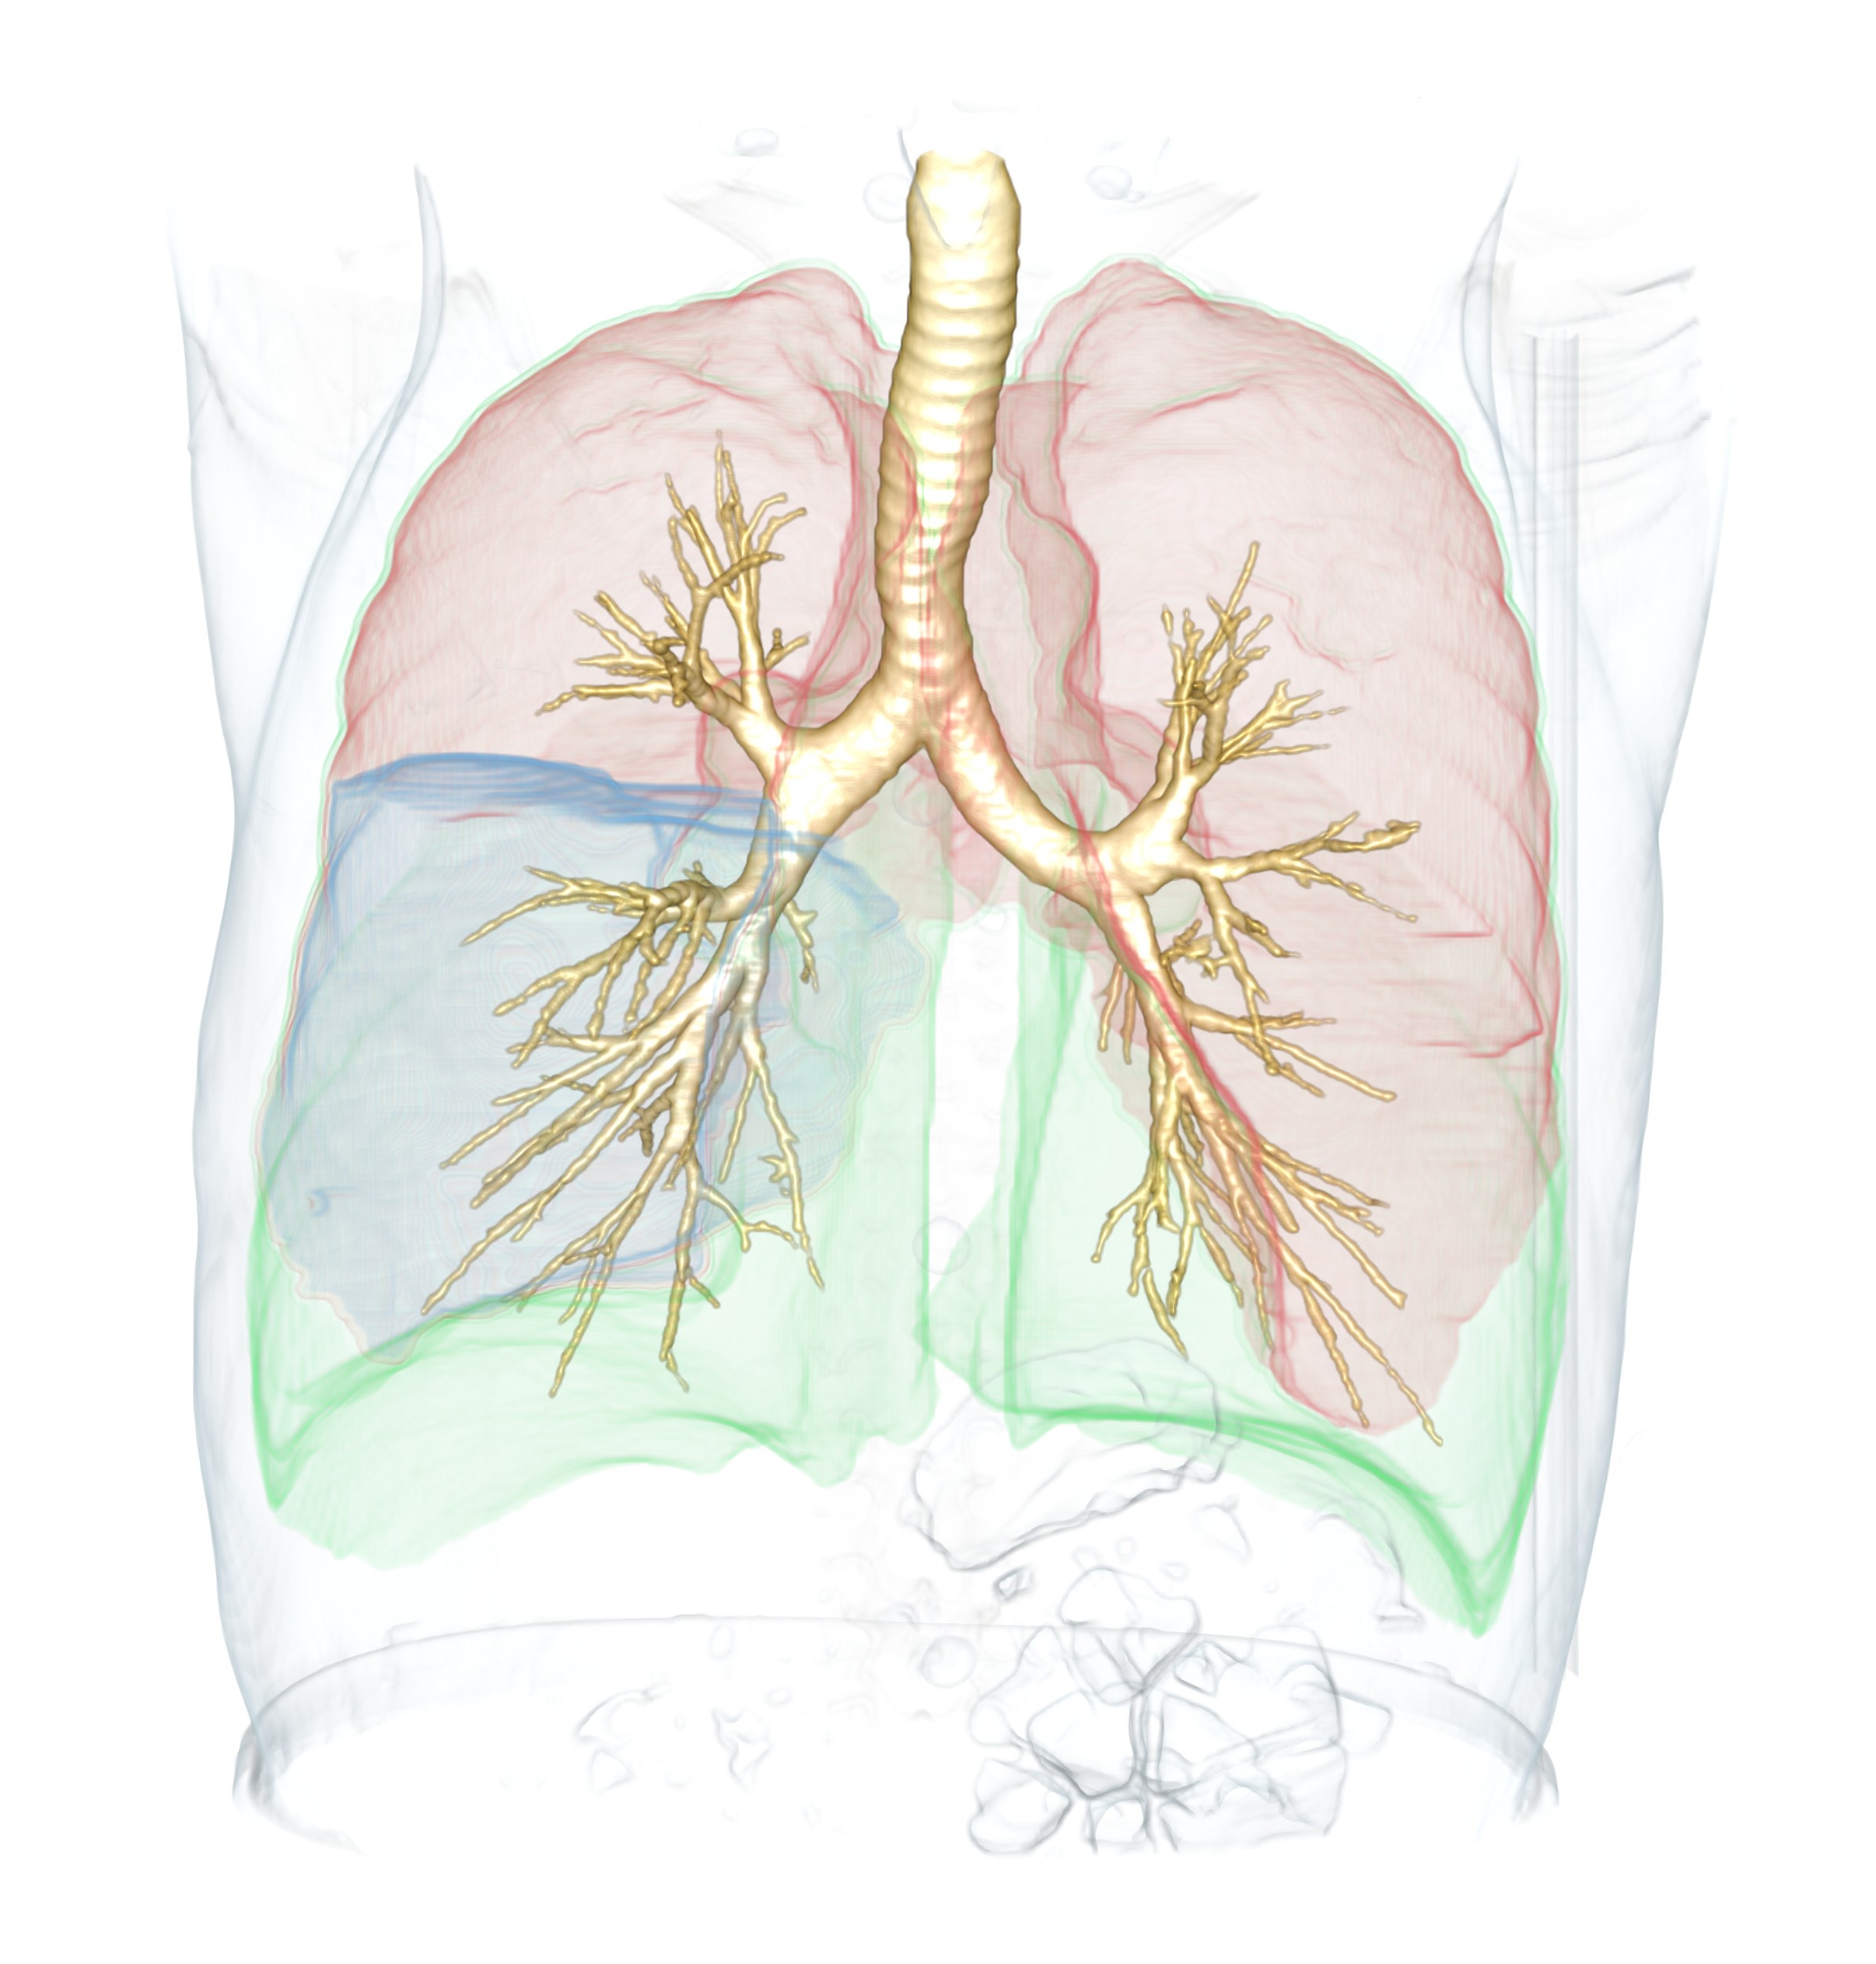 3D volume rendering of the segmented lungs, lobes, and airways.